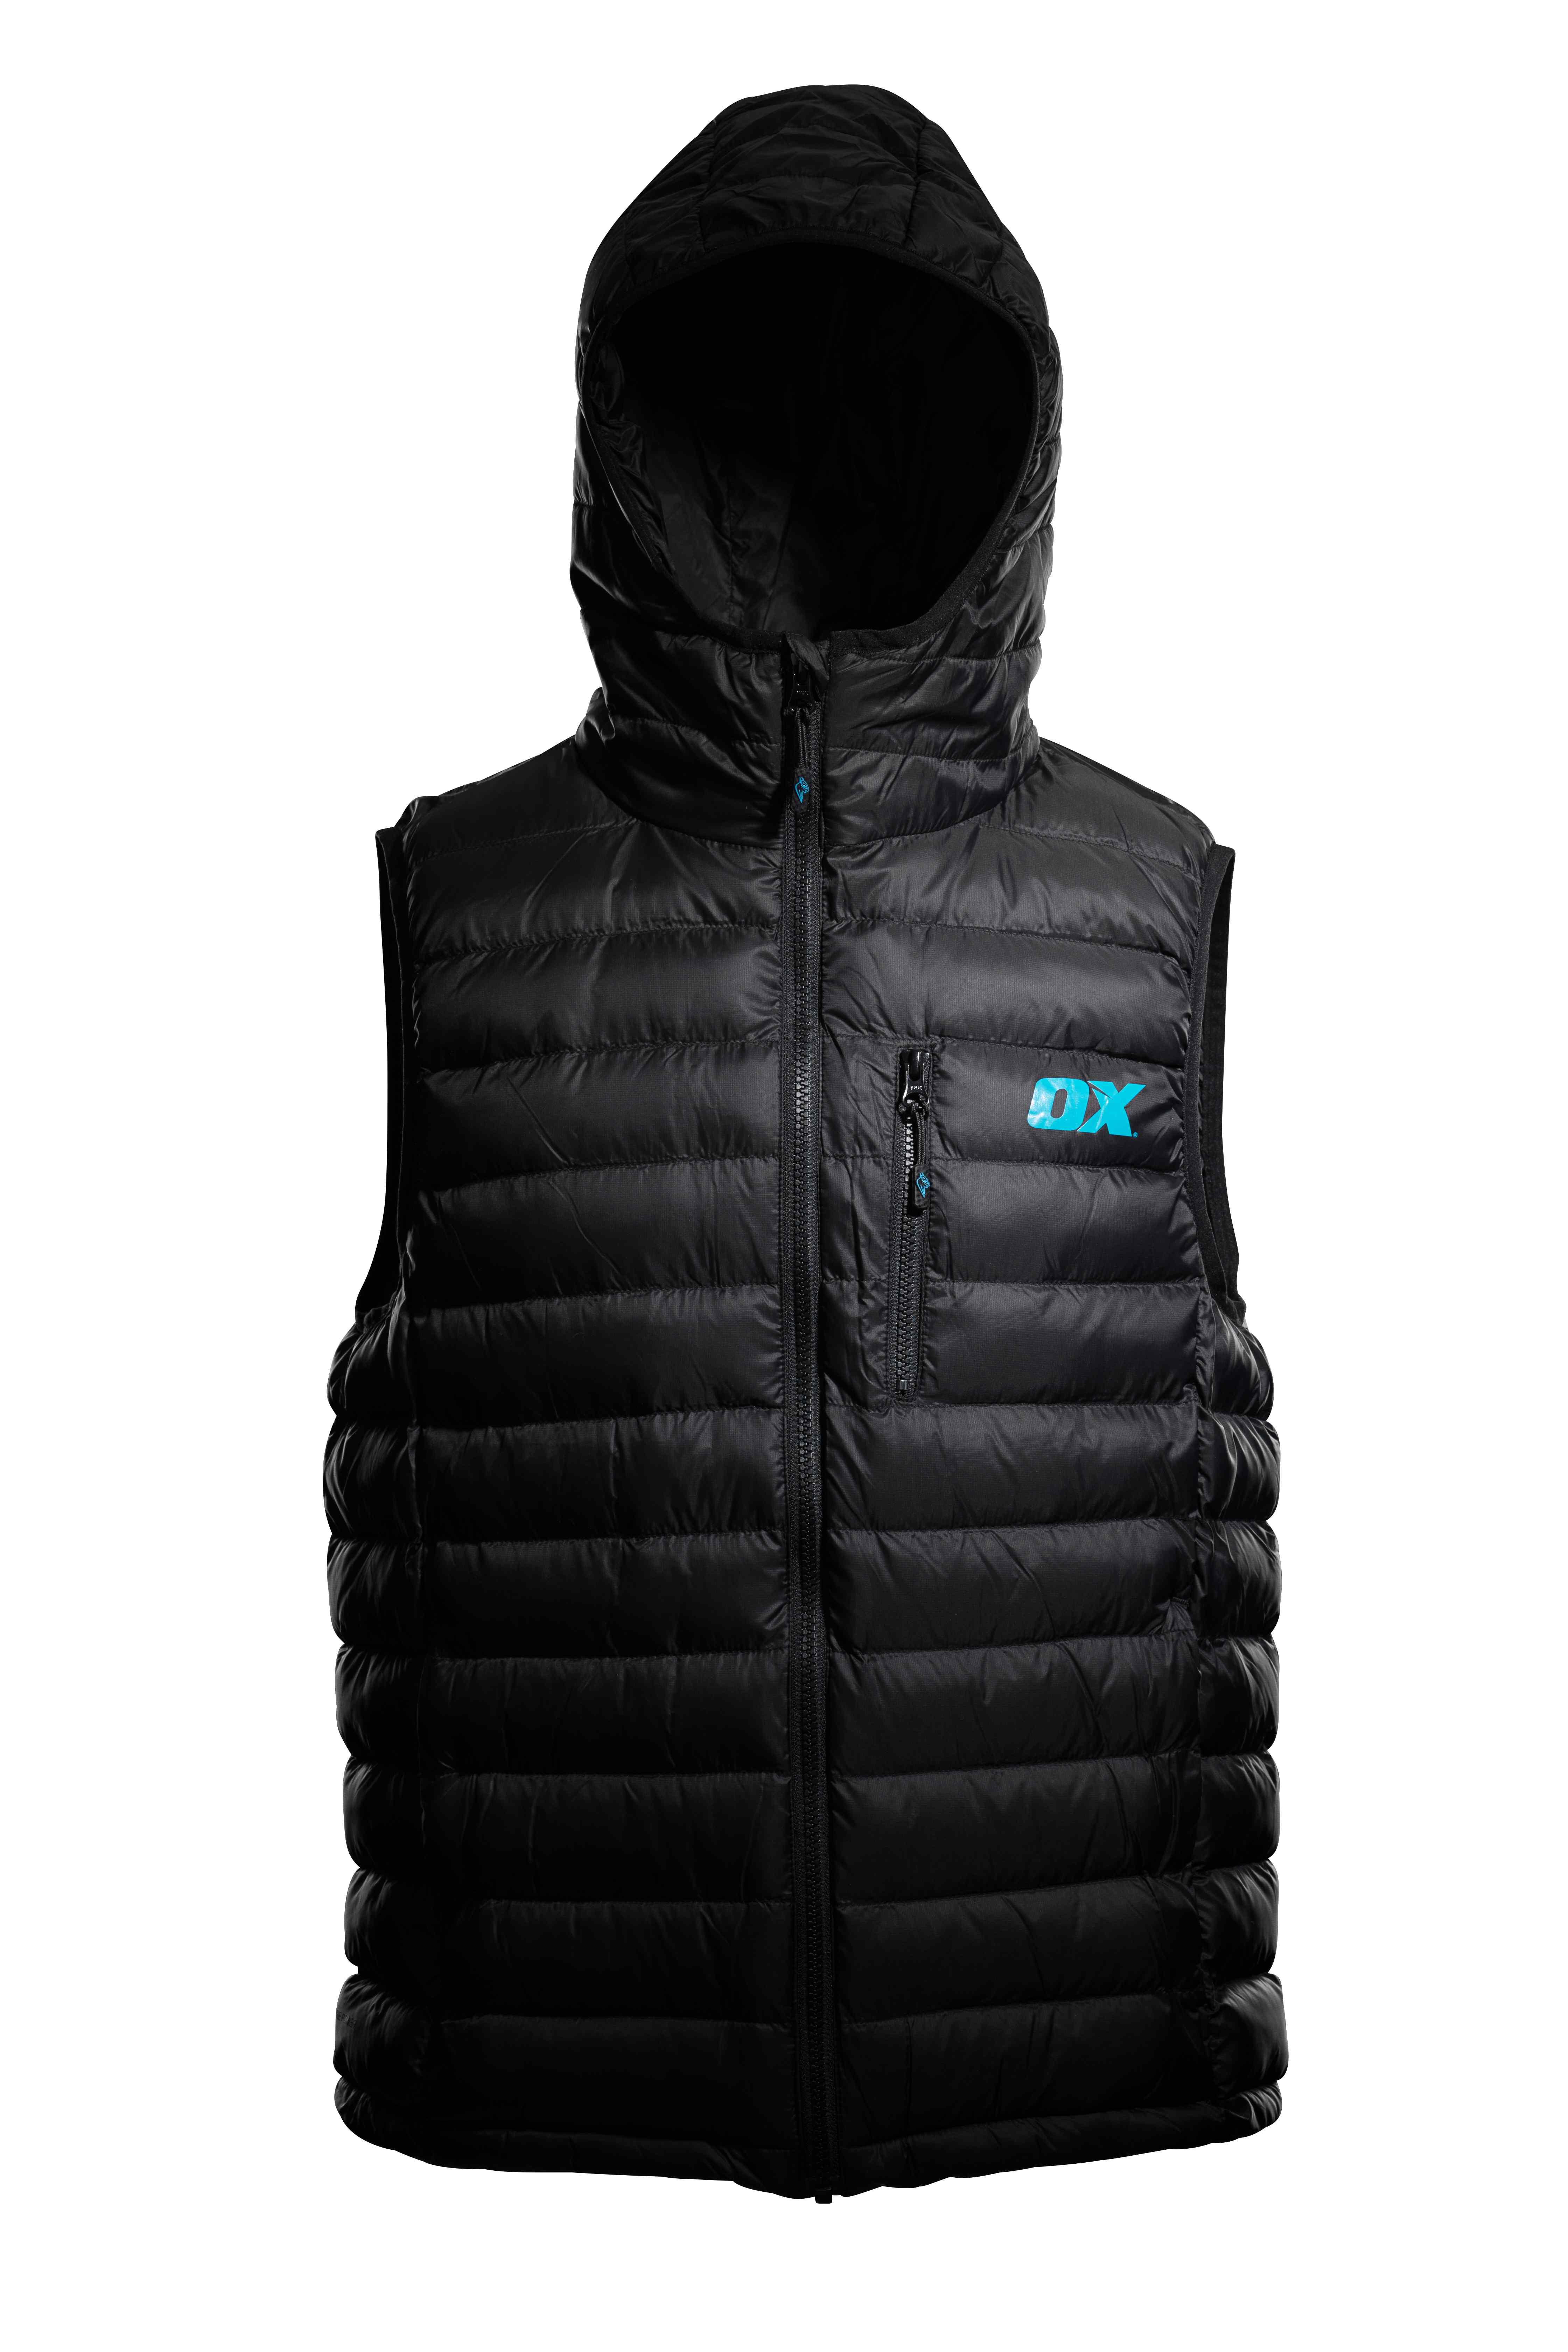 OX Ribbed Padded Gilet - L